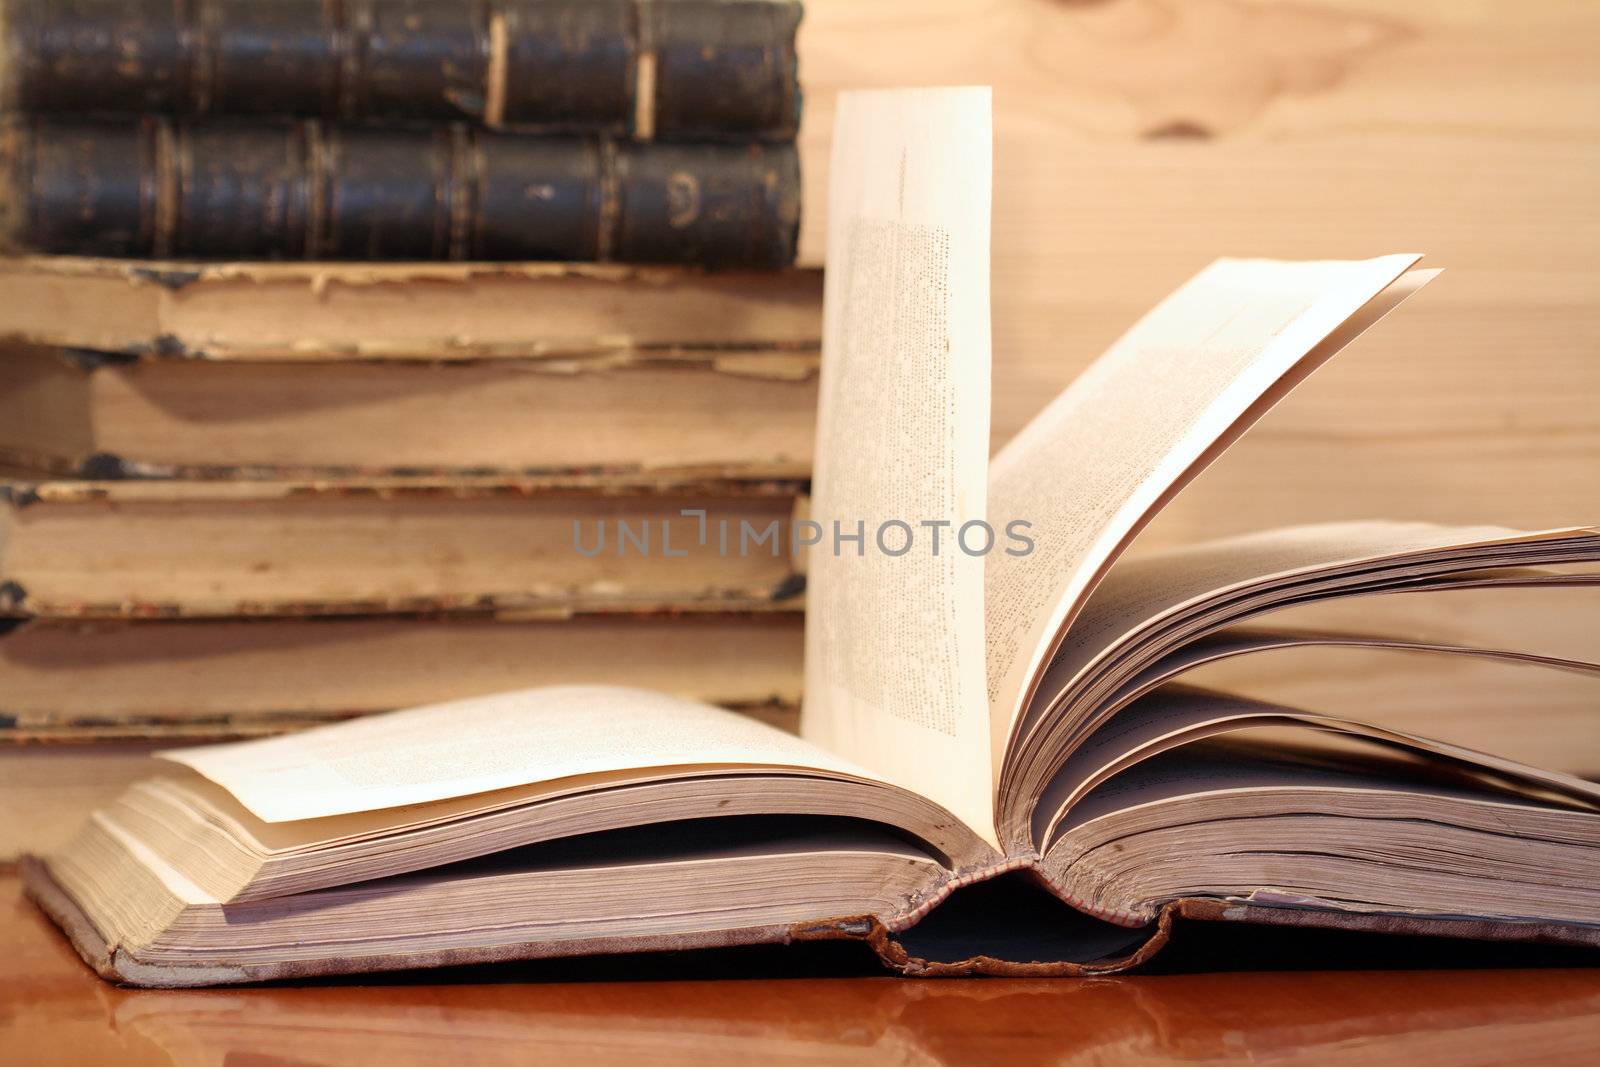 Stack of old books on wooden background